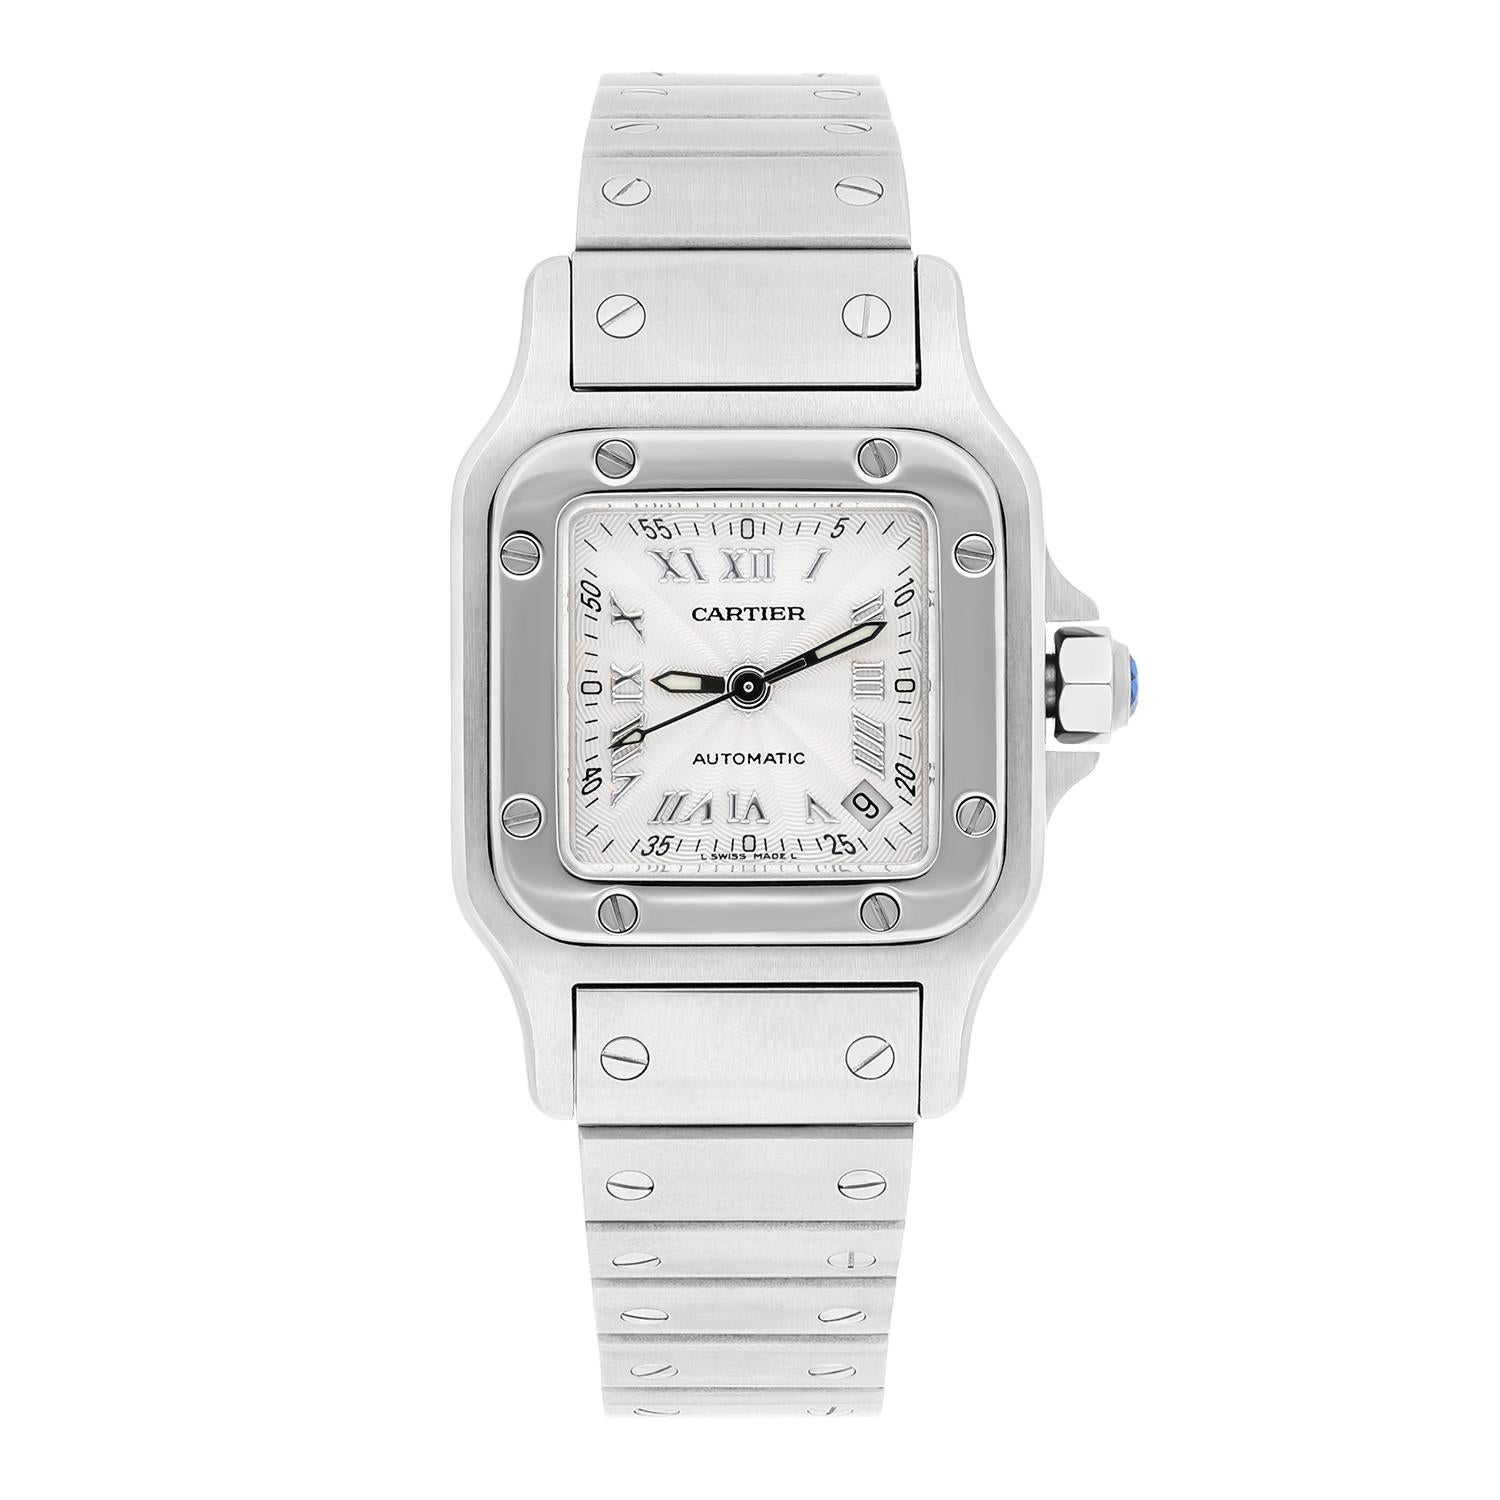 This Cartier Santos Galbee wristwatch is a timeless piece that combines luxury and versatility. The watch features a stainless steel case with a fixed bezel and a silver dial with Roman numerals. The bracelet is also made of stainless steel, giving